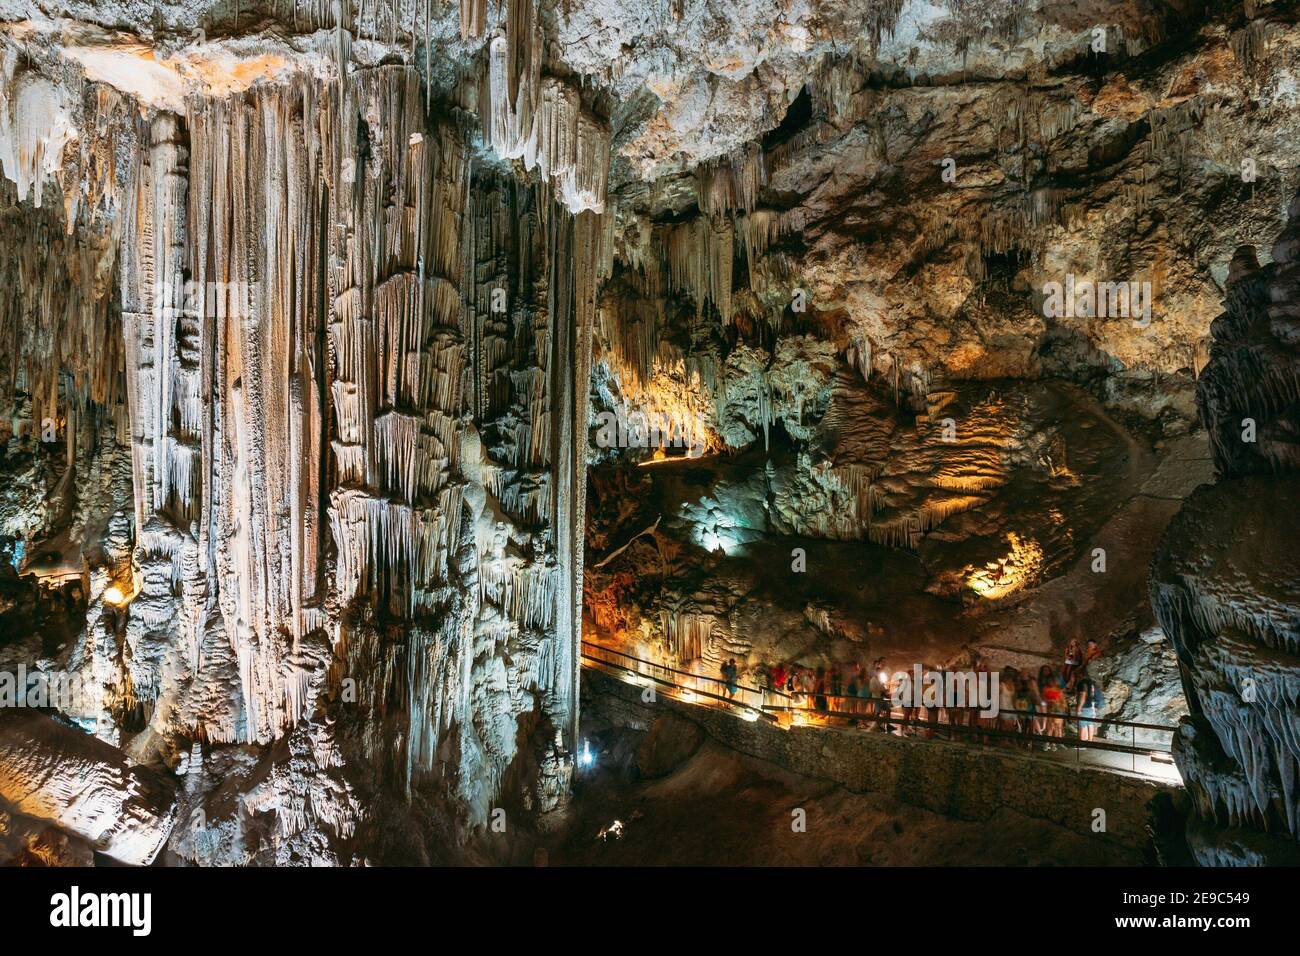 Nerja, Spain. Cuevas De Nerja - Famous Caves. Natural Landmark And One Of The Top Tourist Attractions In Spain. Different Rocks, Stalactites And Stock Photo